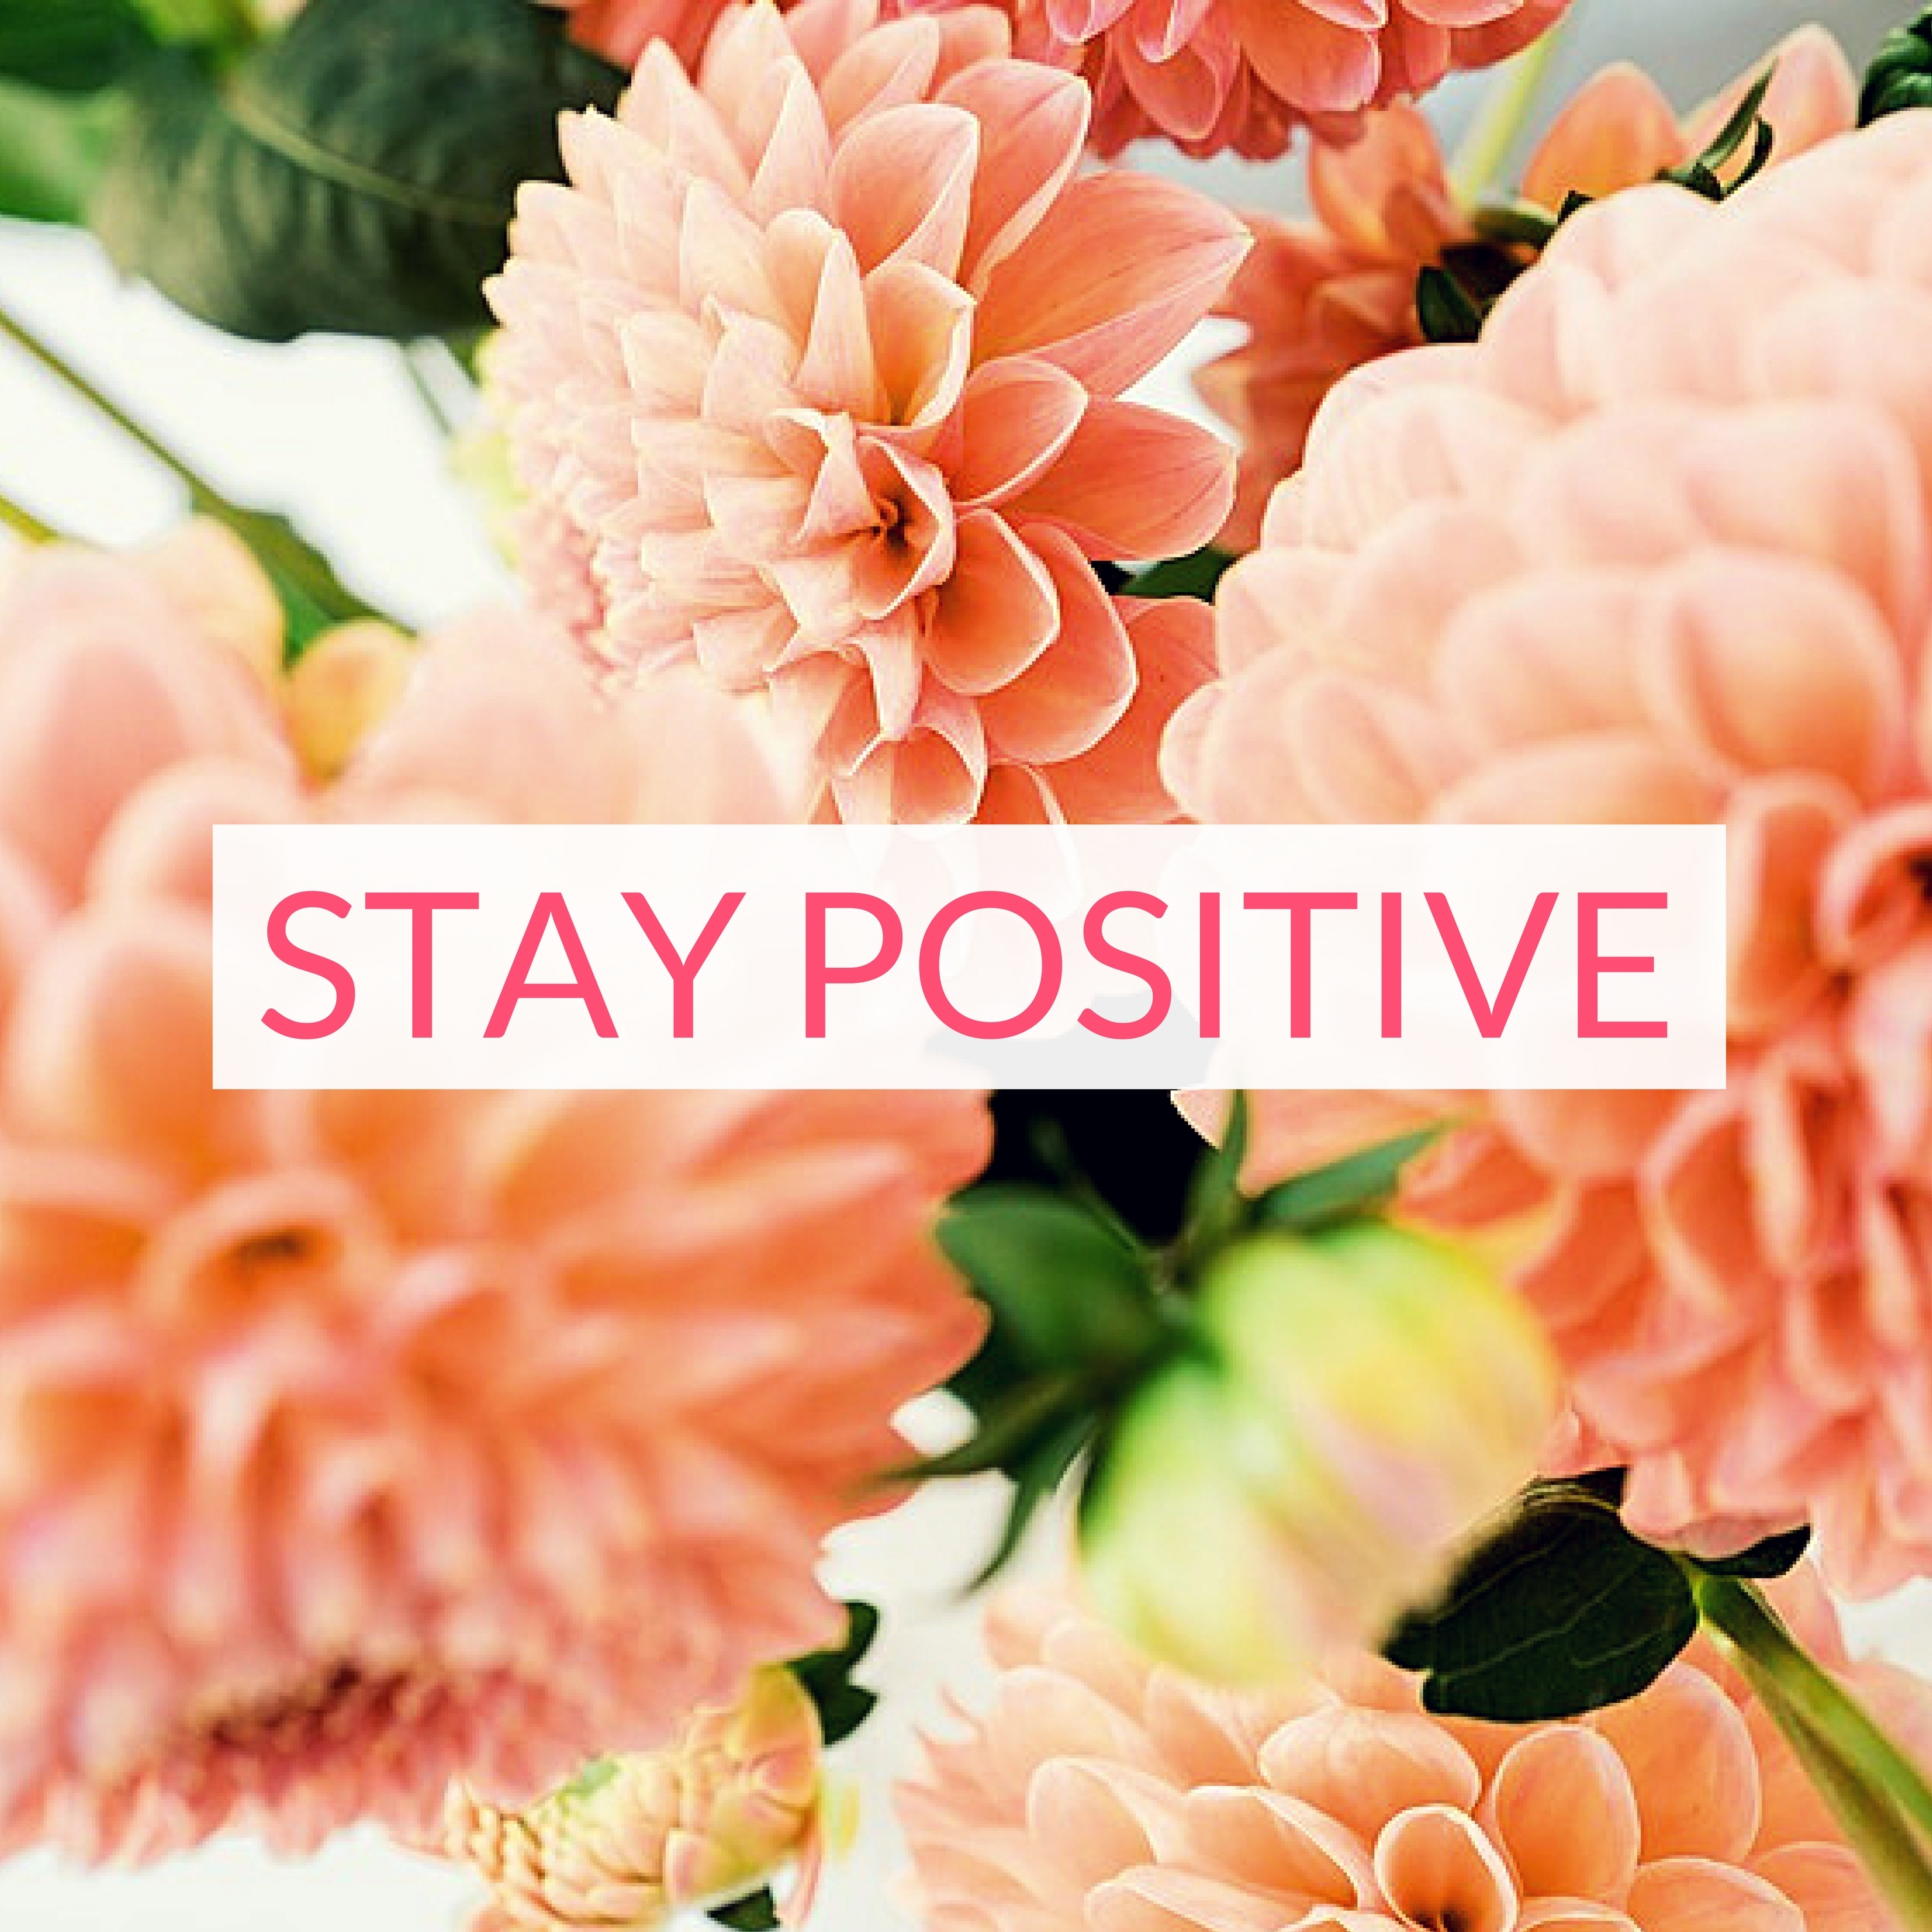 Stay Positive - Relieve Stress & Fight Depression, Background Music to Start the Day with a Smile